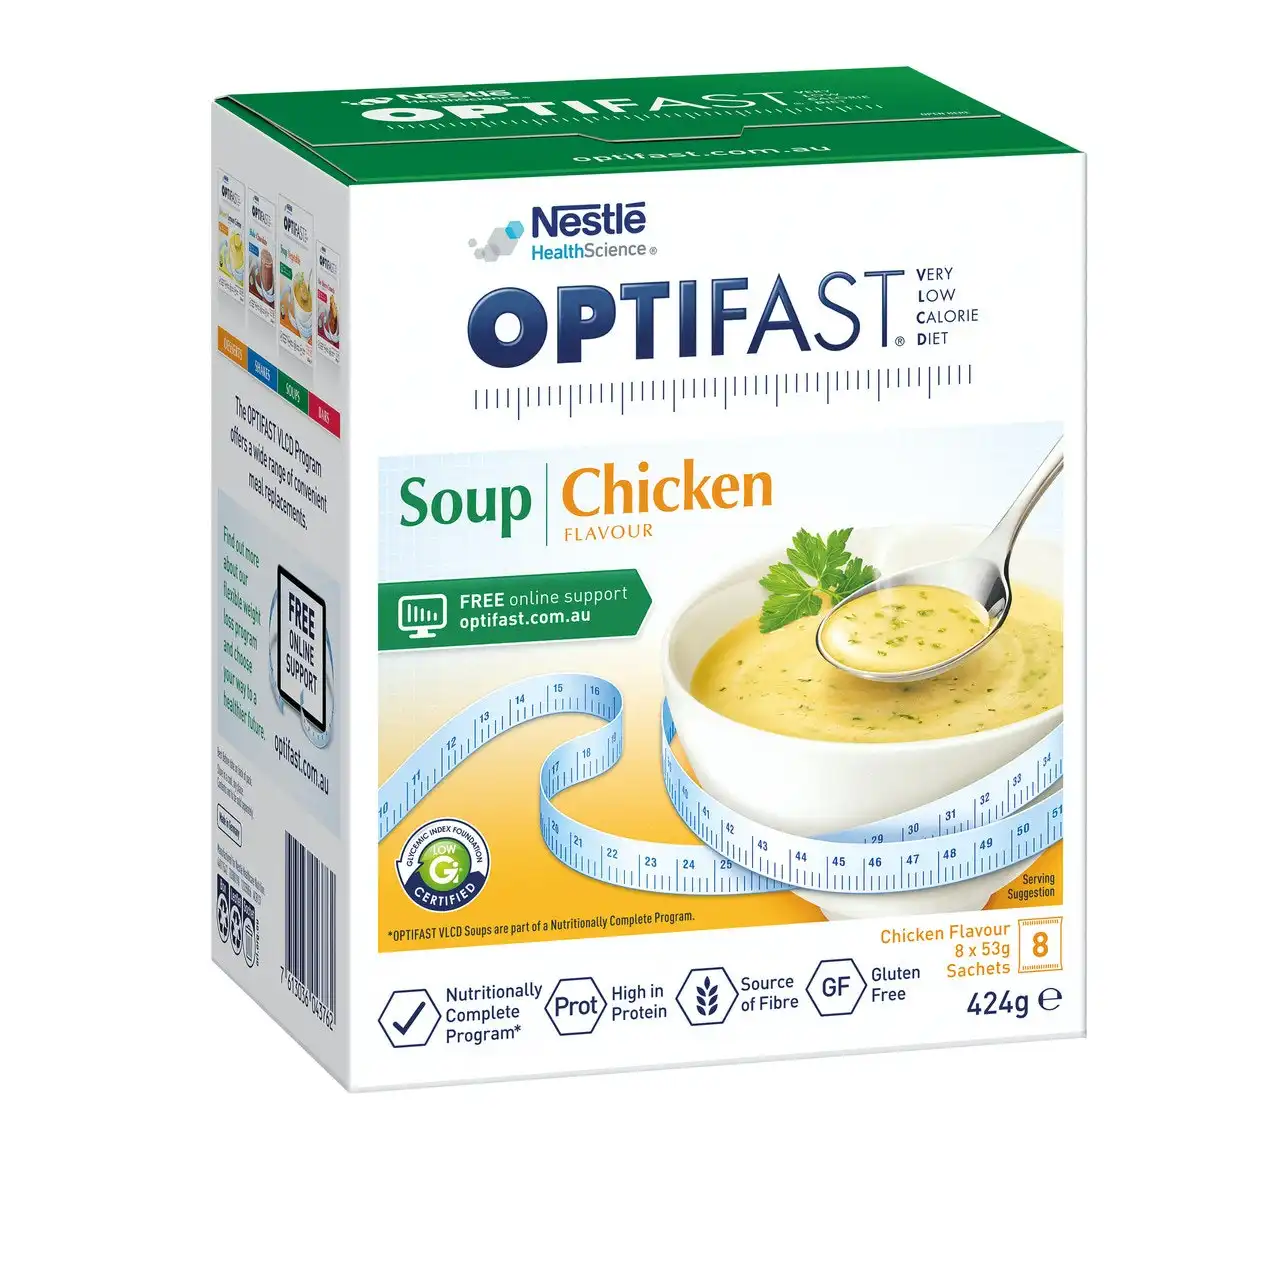 OPTIFAST VLCD Soup Chicken Flavour 8 Pack 424g